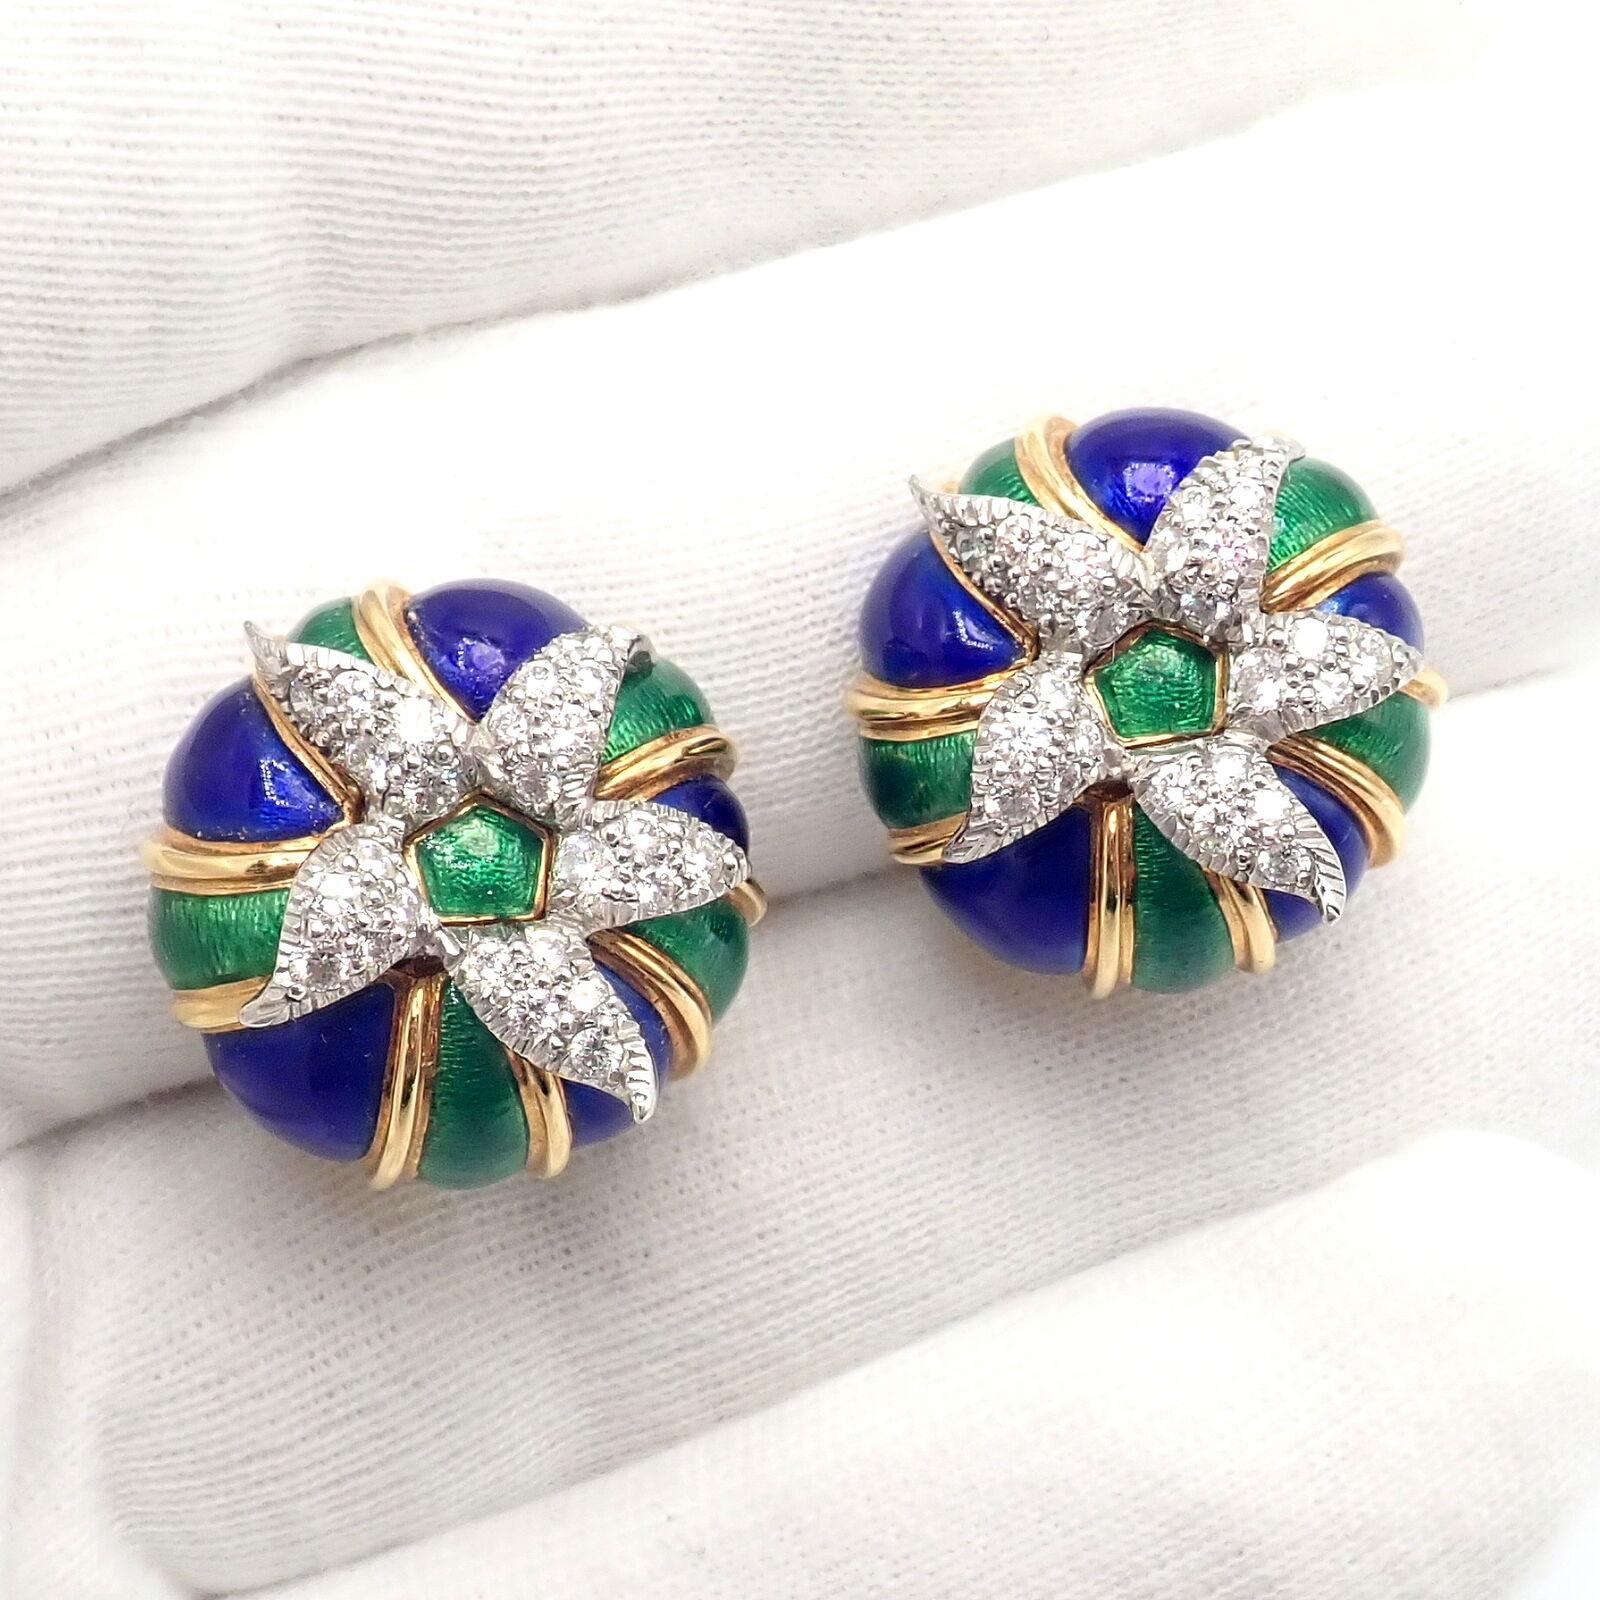 Tiffany & Co Jean Schlumberger Diamond Green Blue Enamel Yellow Gold Earrings In Excellent Condition For Sale In Holland, PA